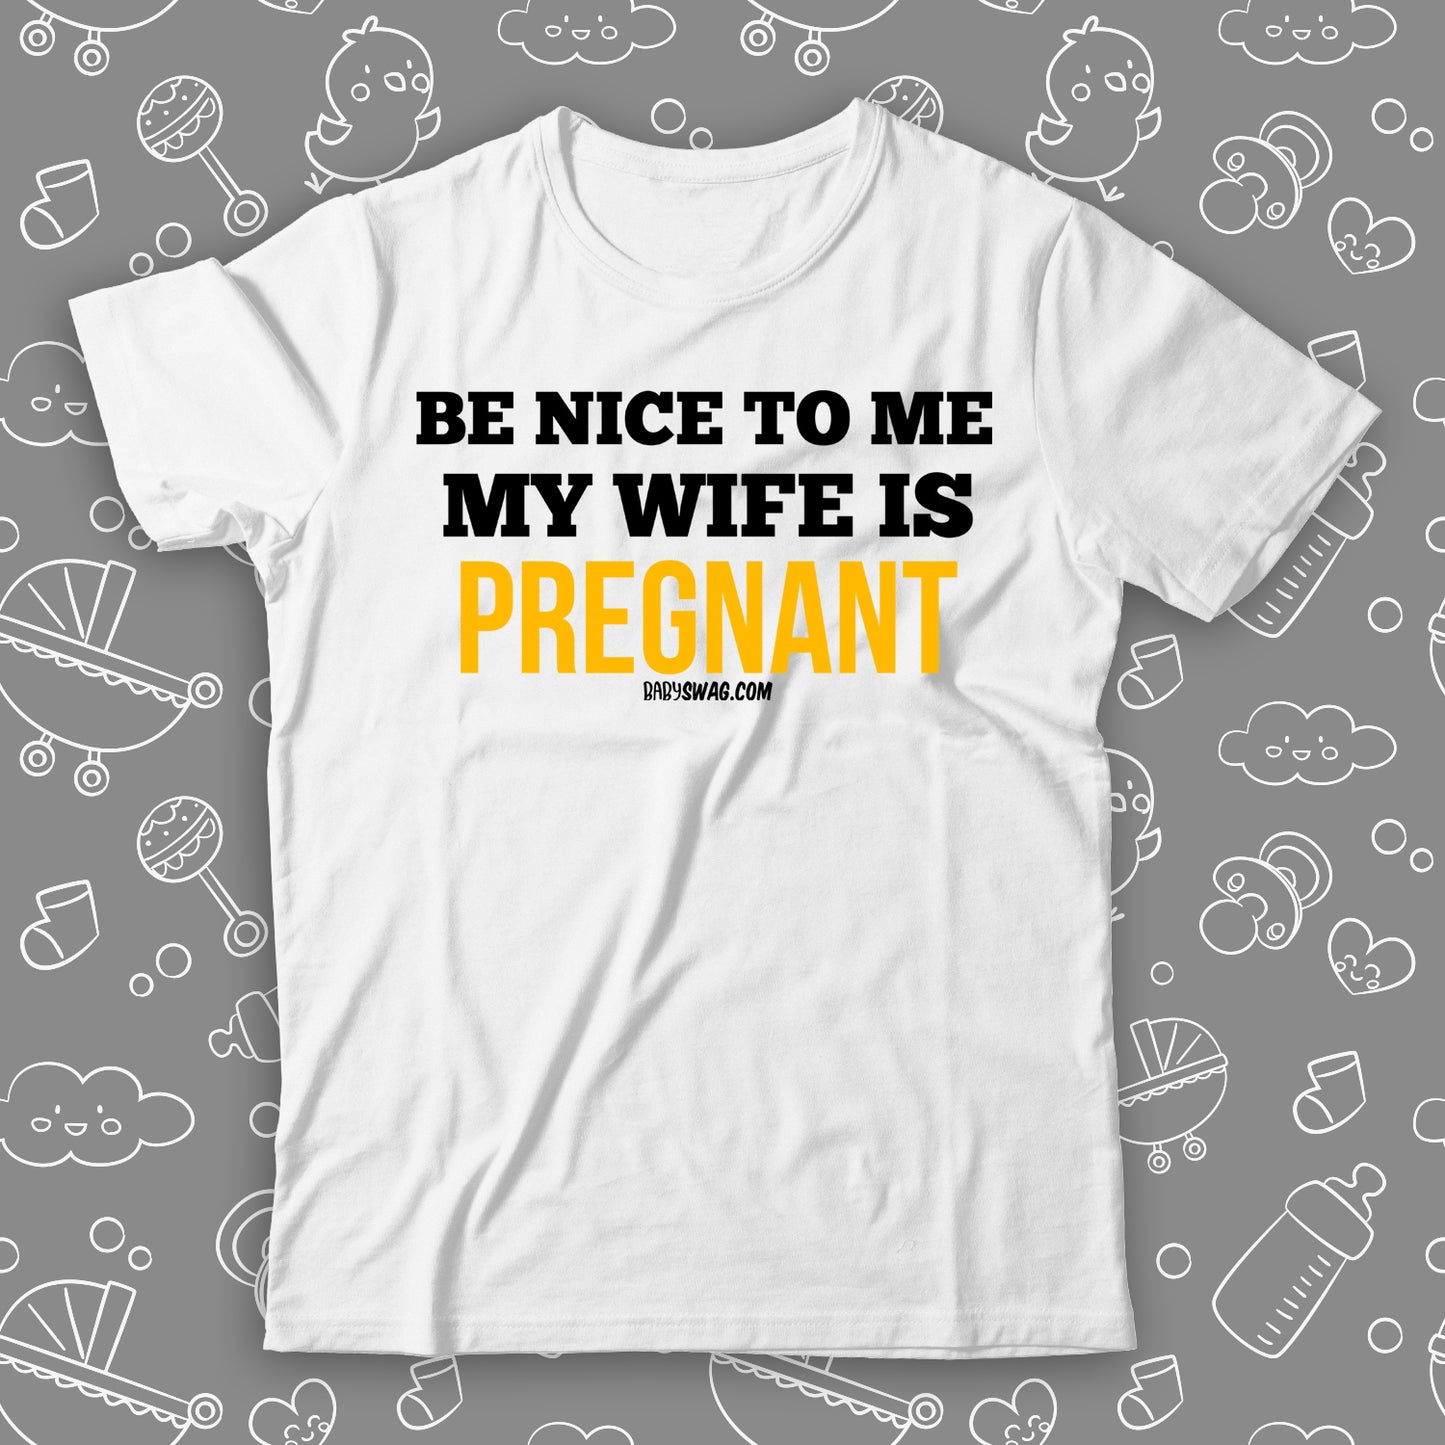 Be Nice To Me, My Wife Is Pregnant